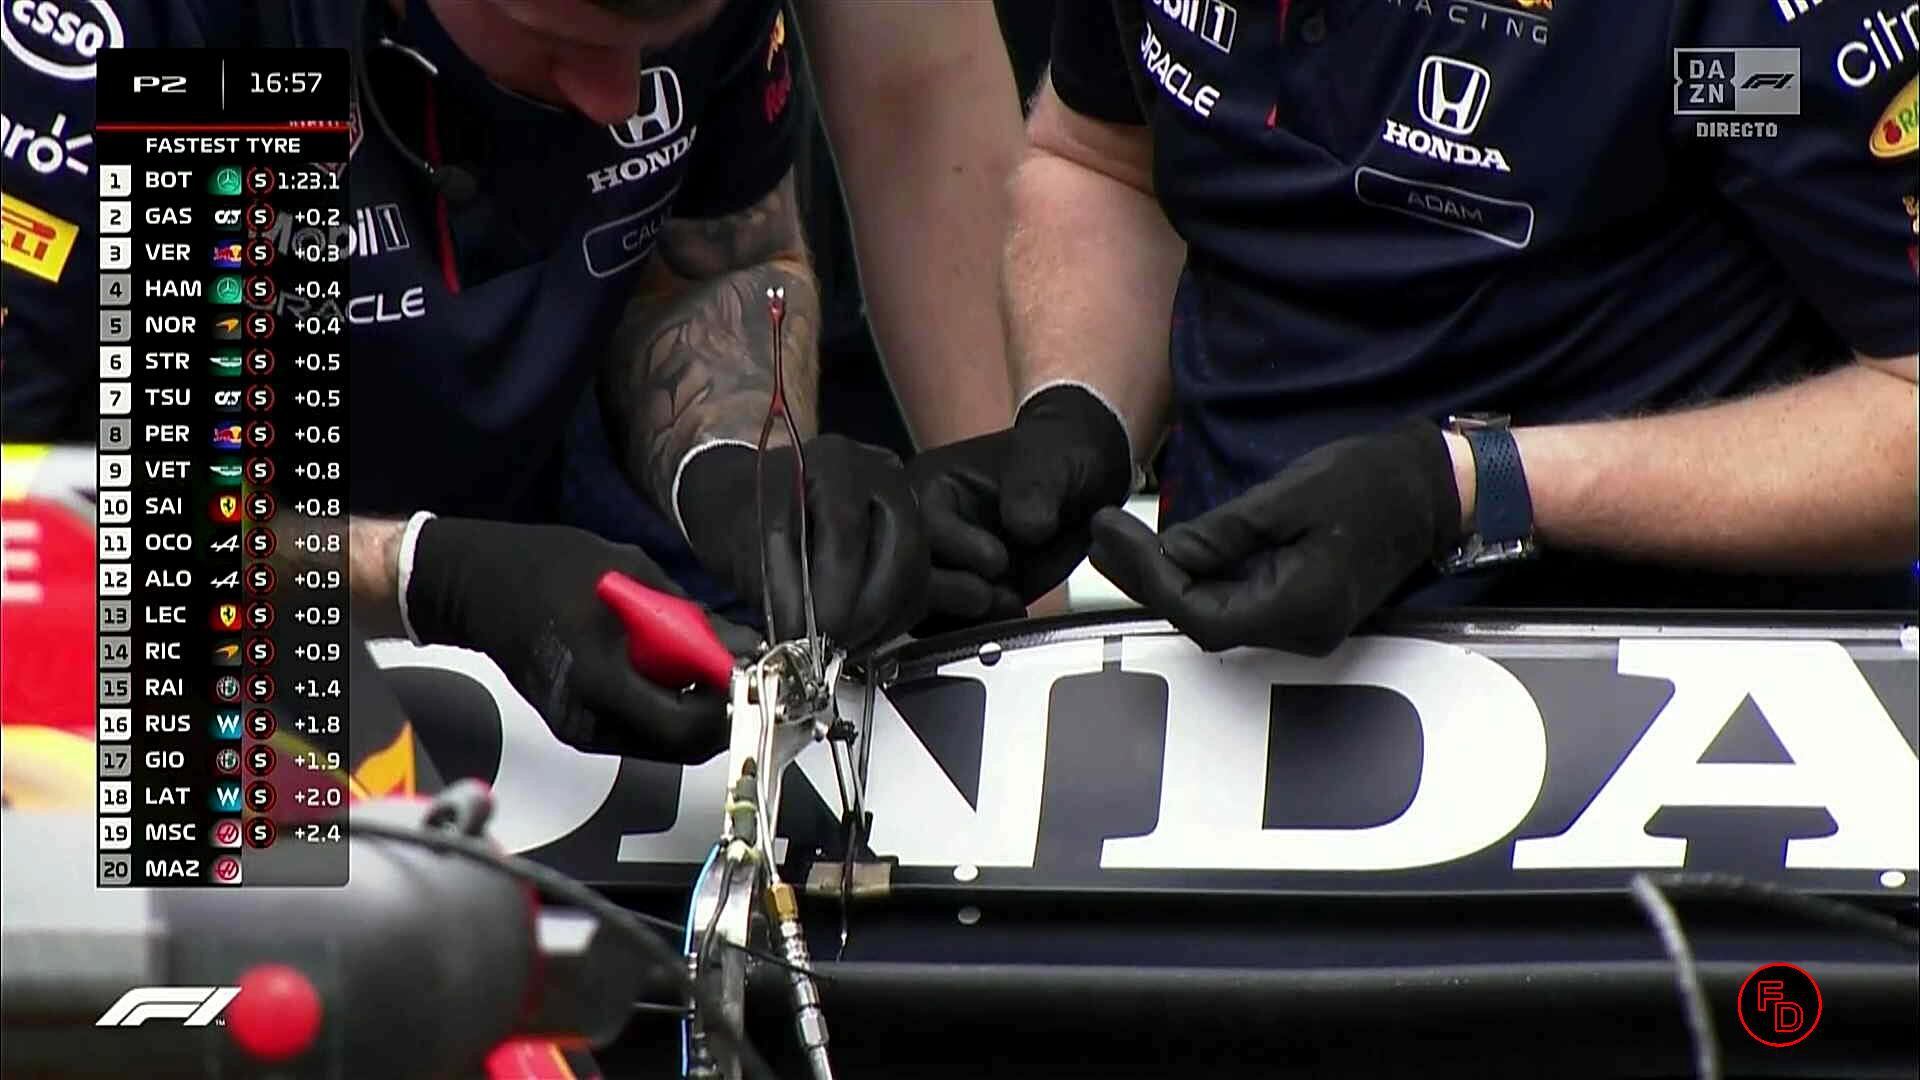 Red Bull engineers repairing Sergio Checo Pérez's rear wing at the Qatar GP (Photo: F1TV)